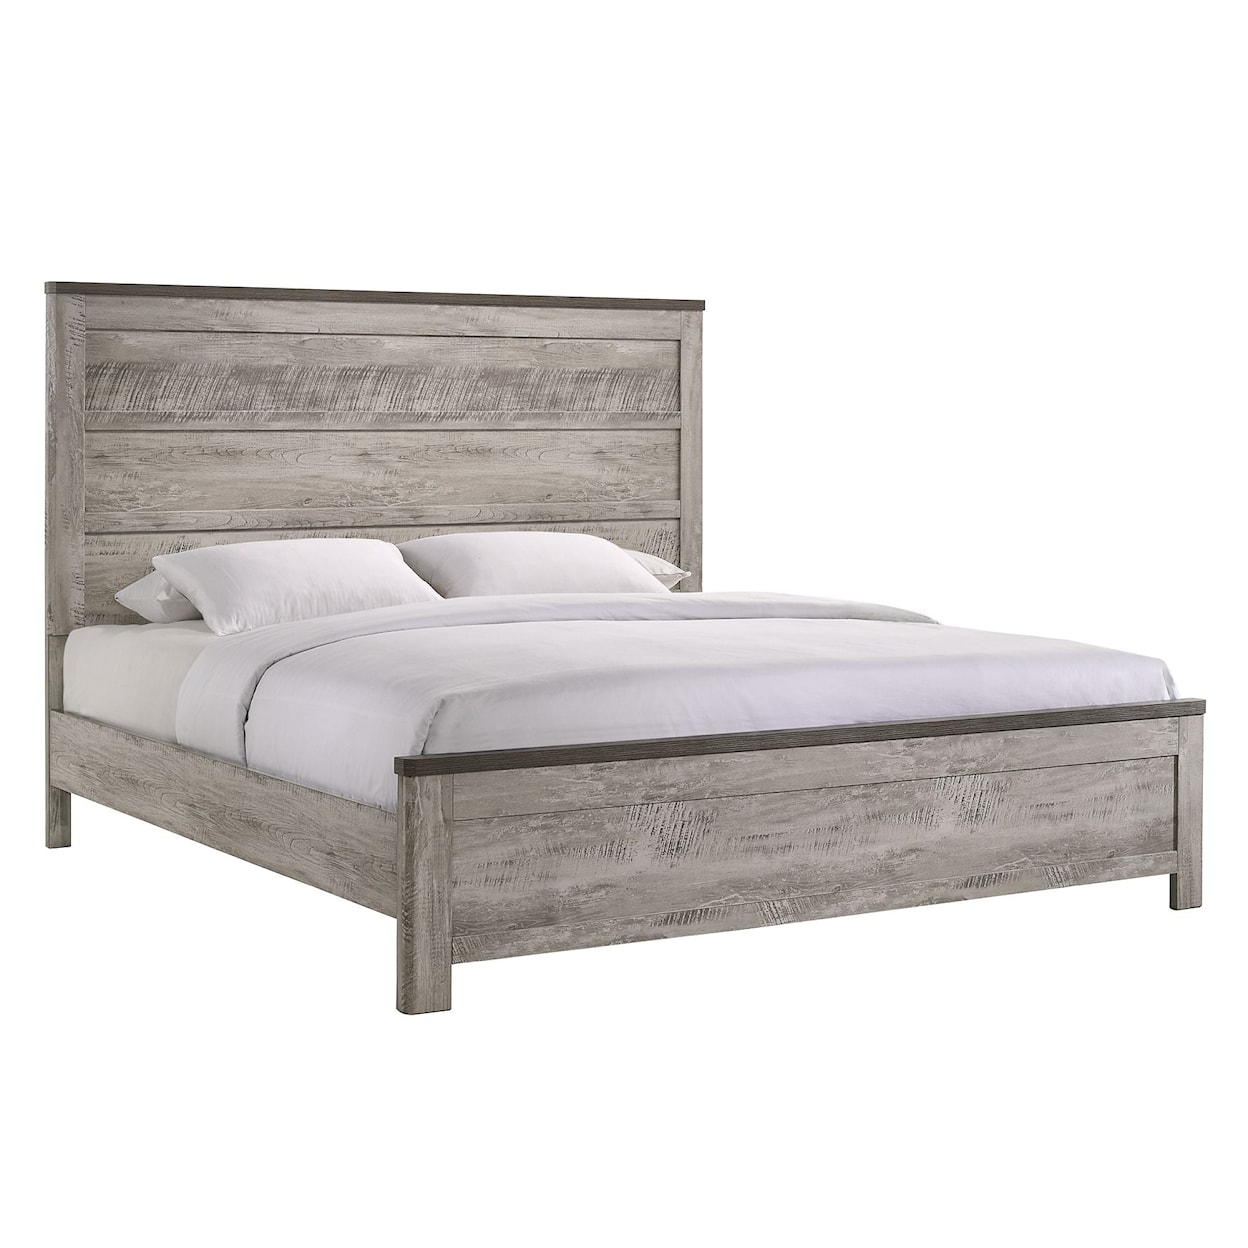 Elements International Millers Cove- Millers Cove King Panel 4PC Bedroom Set